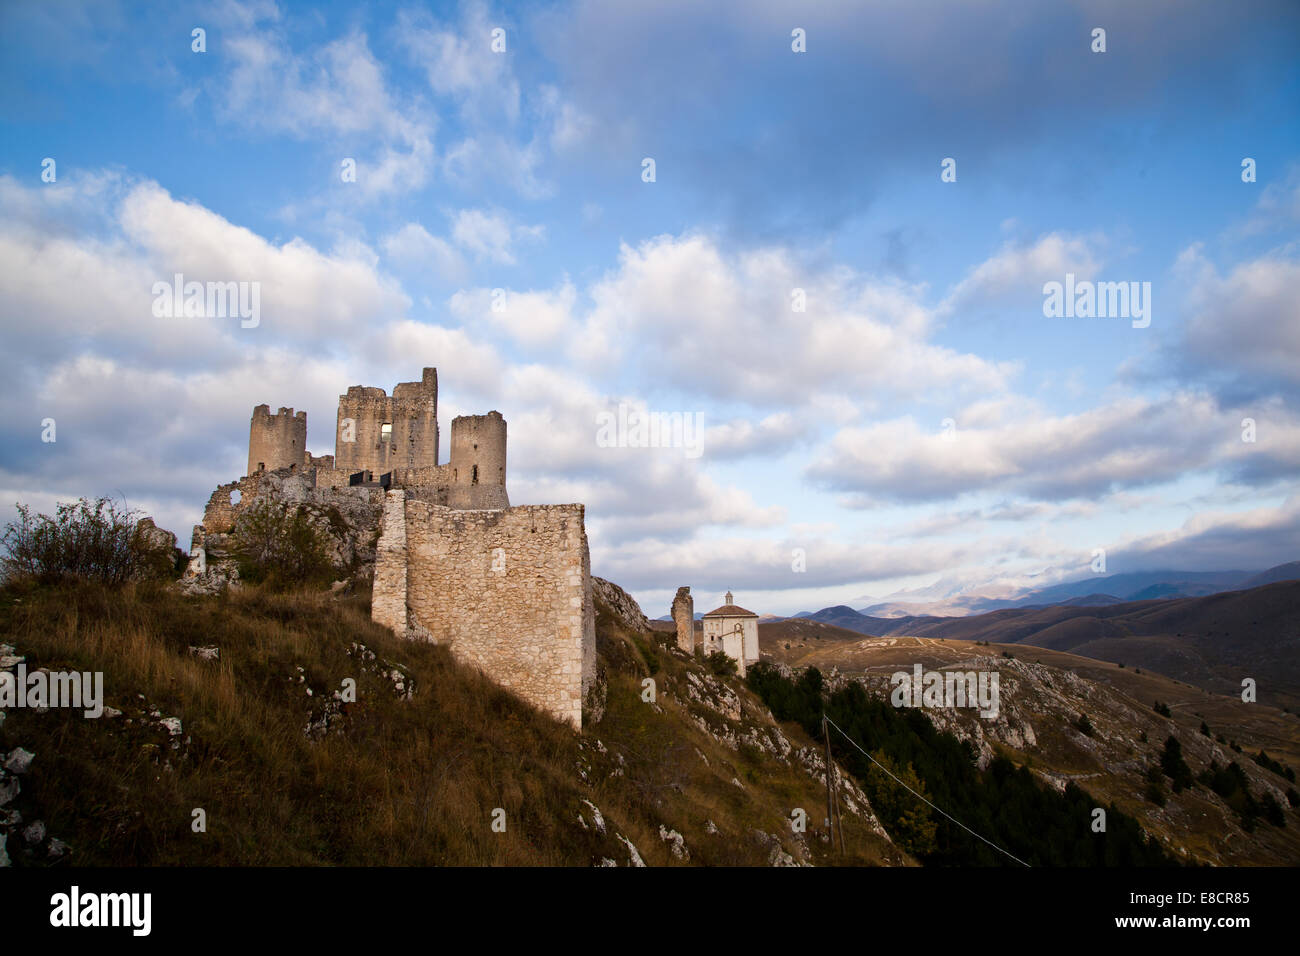 Calascio (L'Aquila) Italy: Scenery view of castle of Calascio at sunrise with a stunning sky Stock Photo